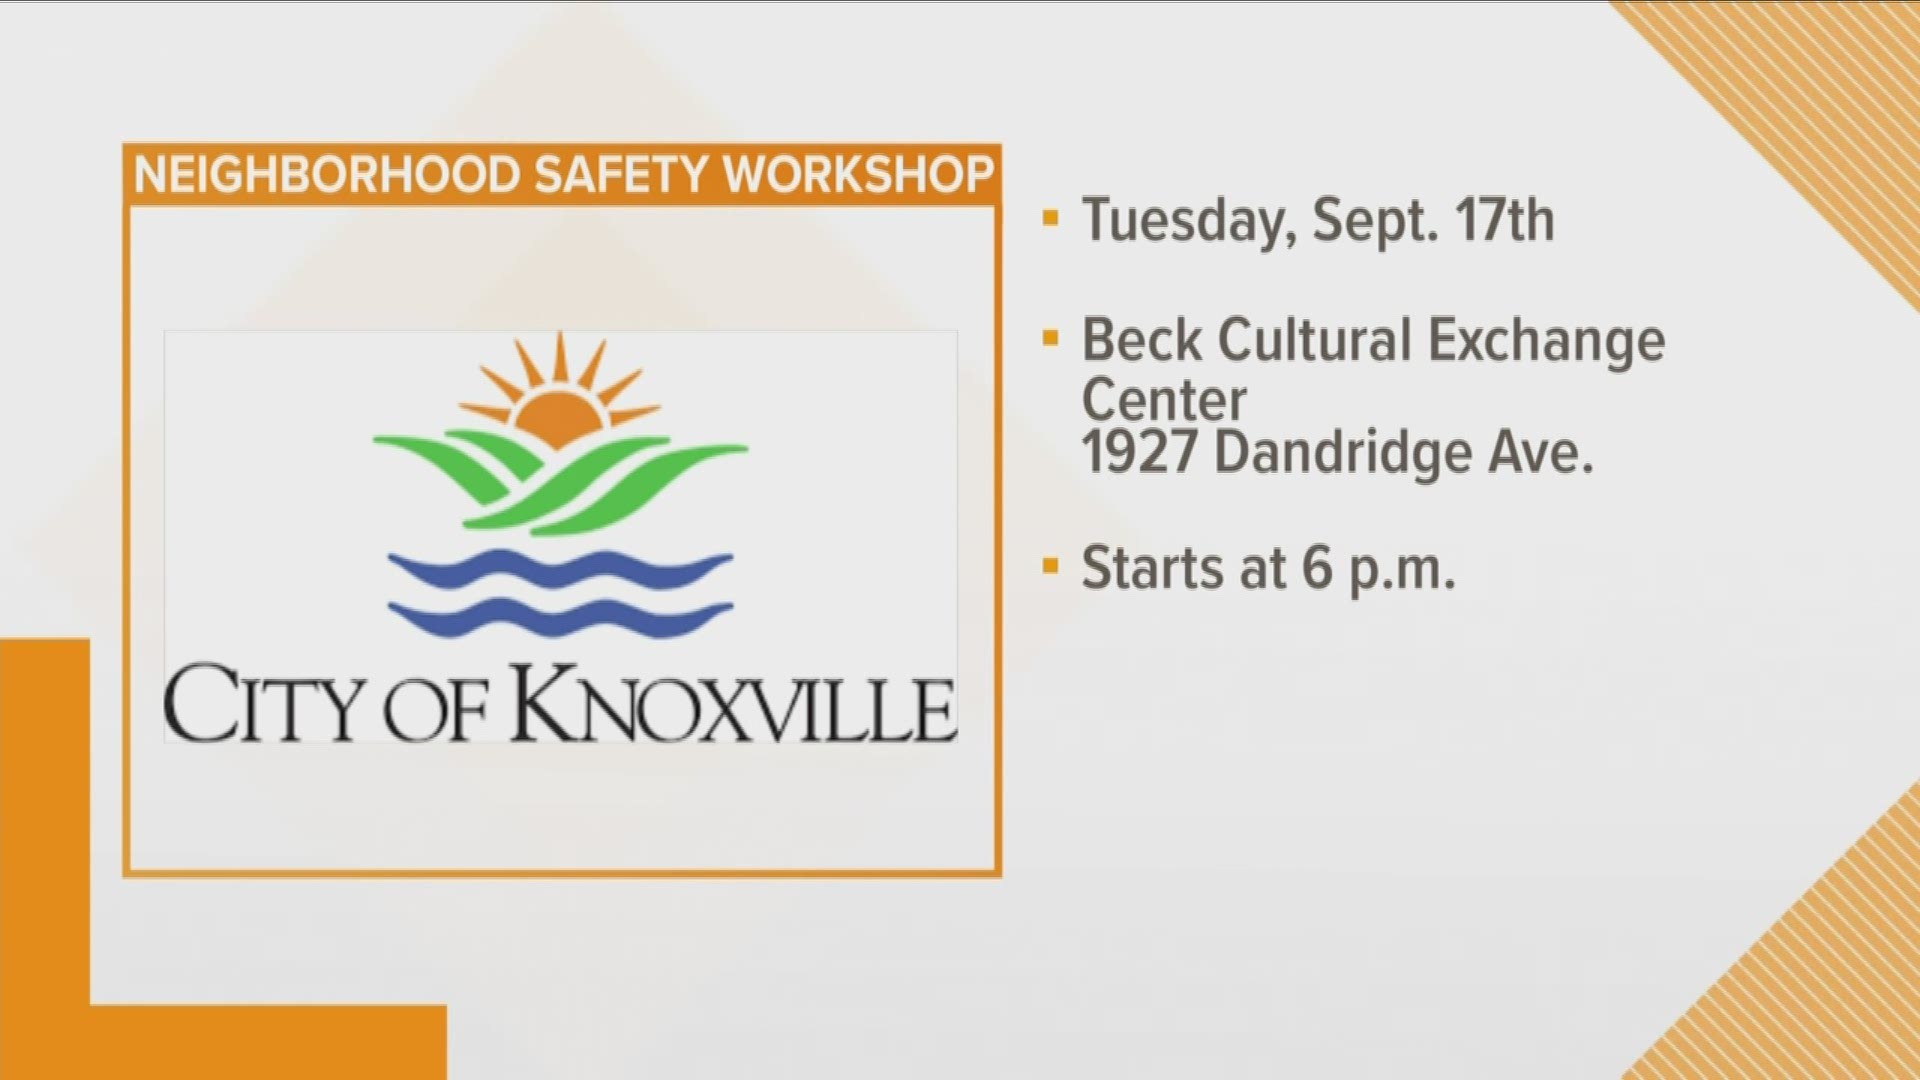 Leaders and community members will meet and discuss neighborhood safety in East and Downtown Knoxville on Tuesday.